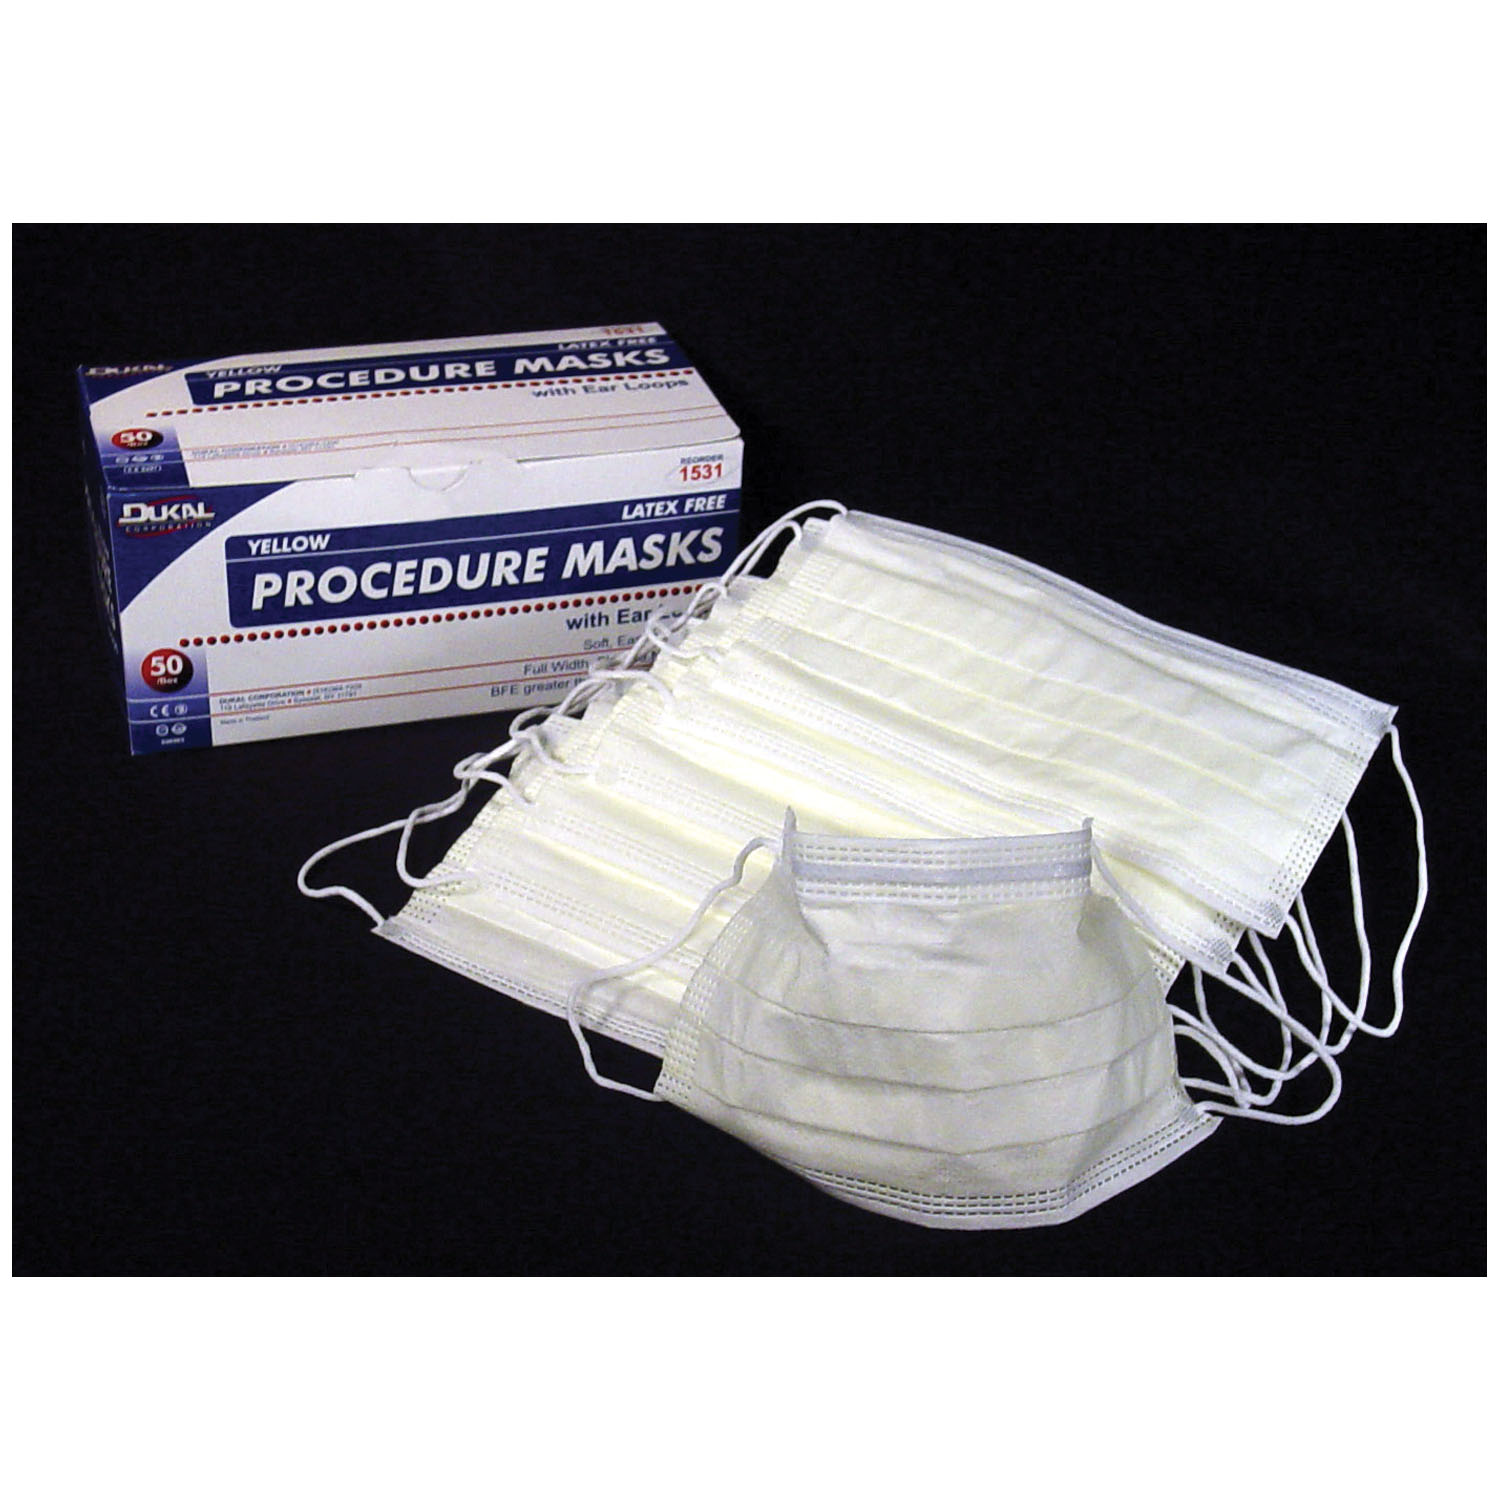 DUKAL SURGICAL FACE MASKS : 1541 BX        $37.15 Stocked